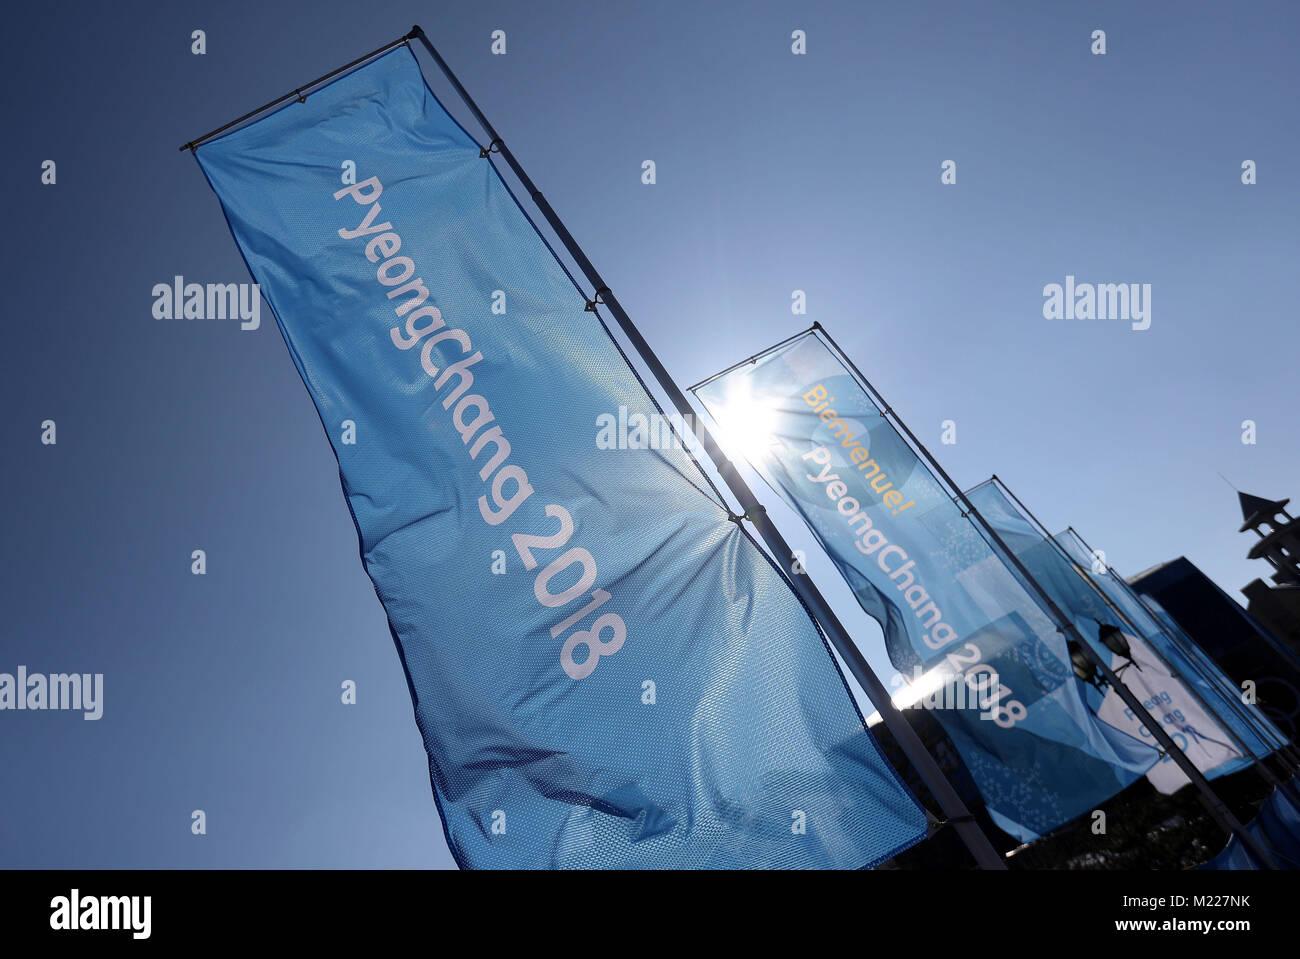 Pyeong Chang 2018 flags during a preview day at the Alpensia Sports Park, ahead of the PyeongChang 2018 Winter Olympic Games in South Korea. Stock Photo